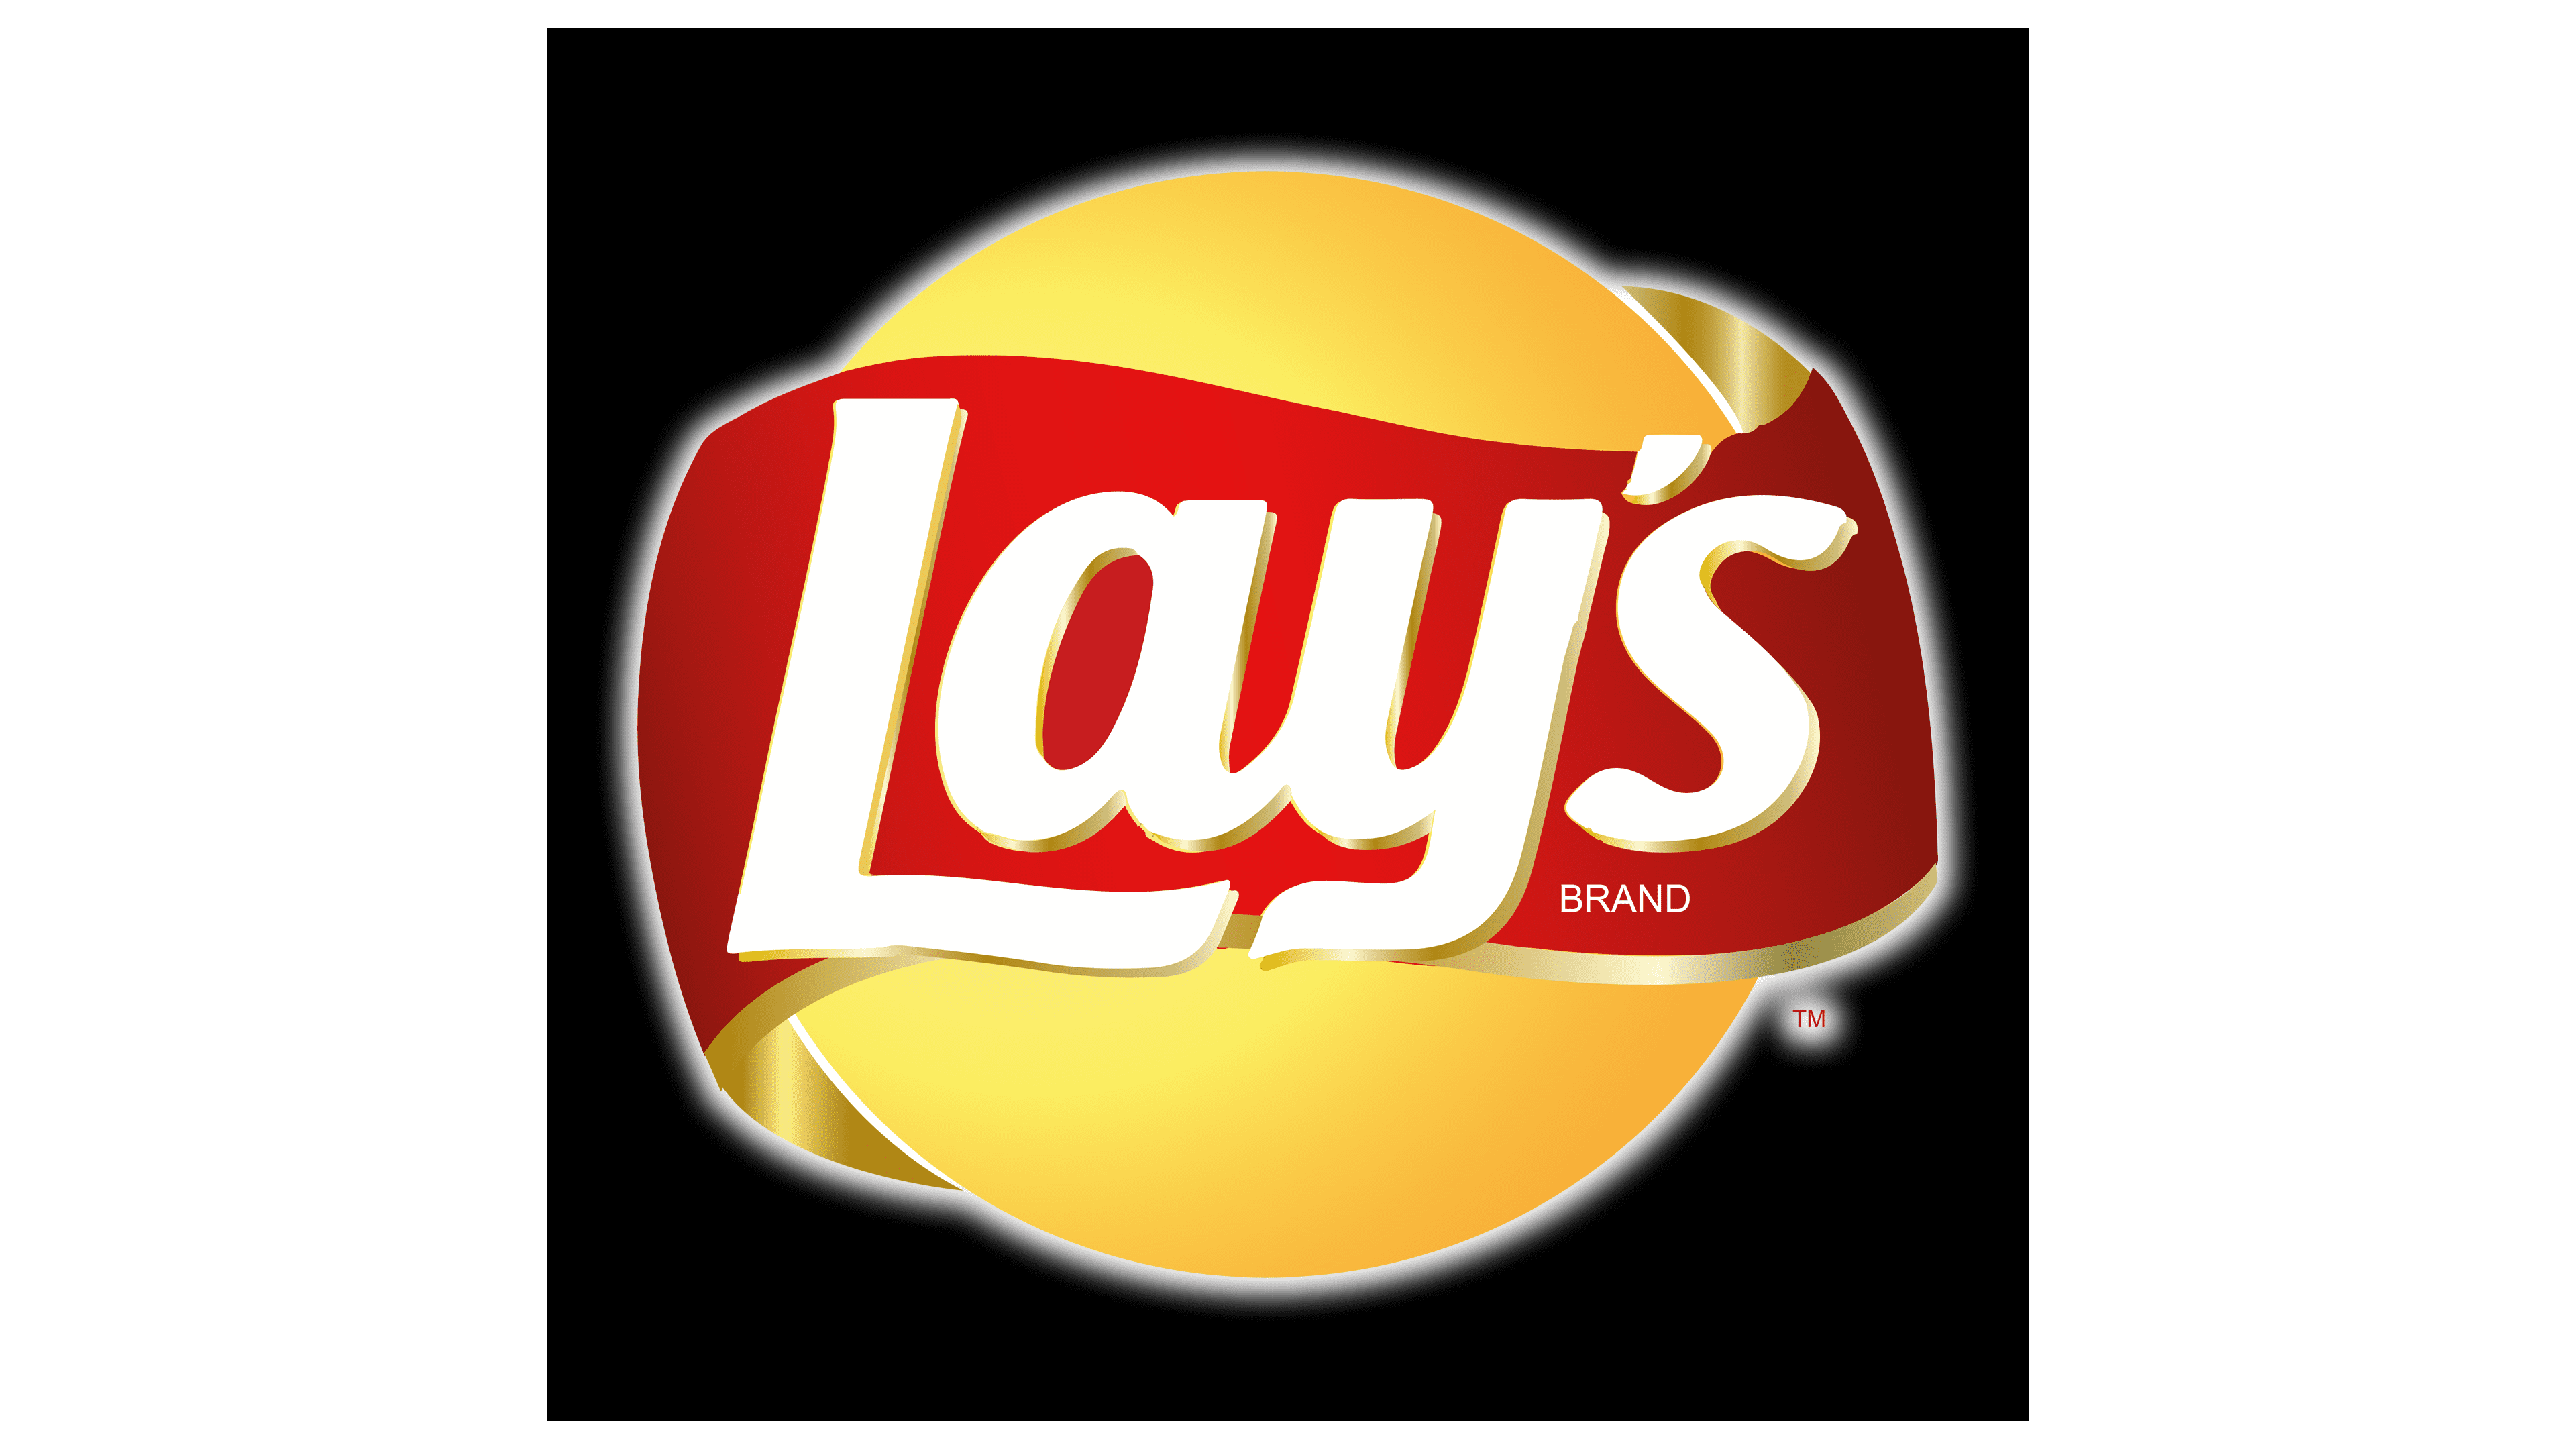 Lay's Chips Logo